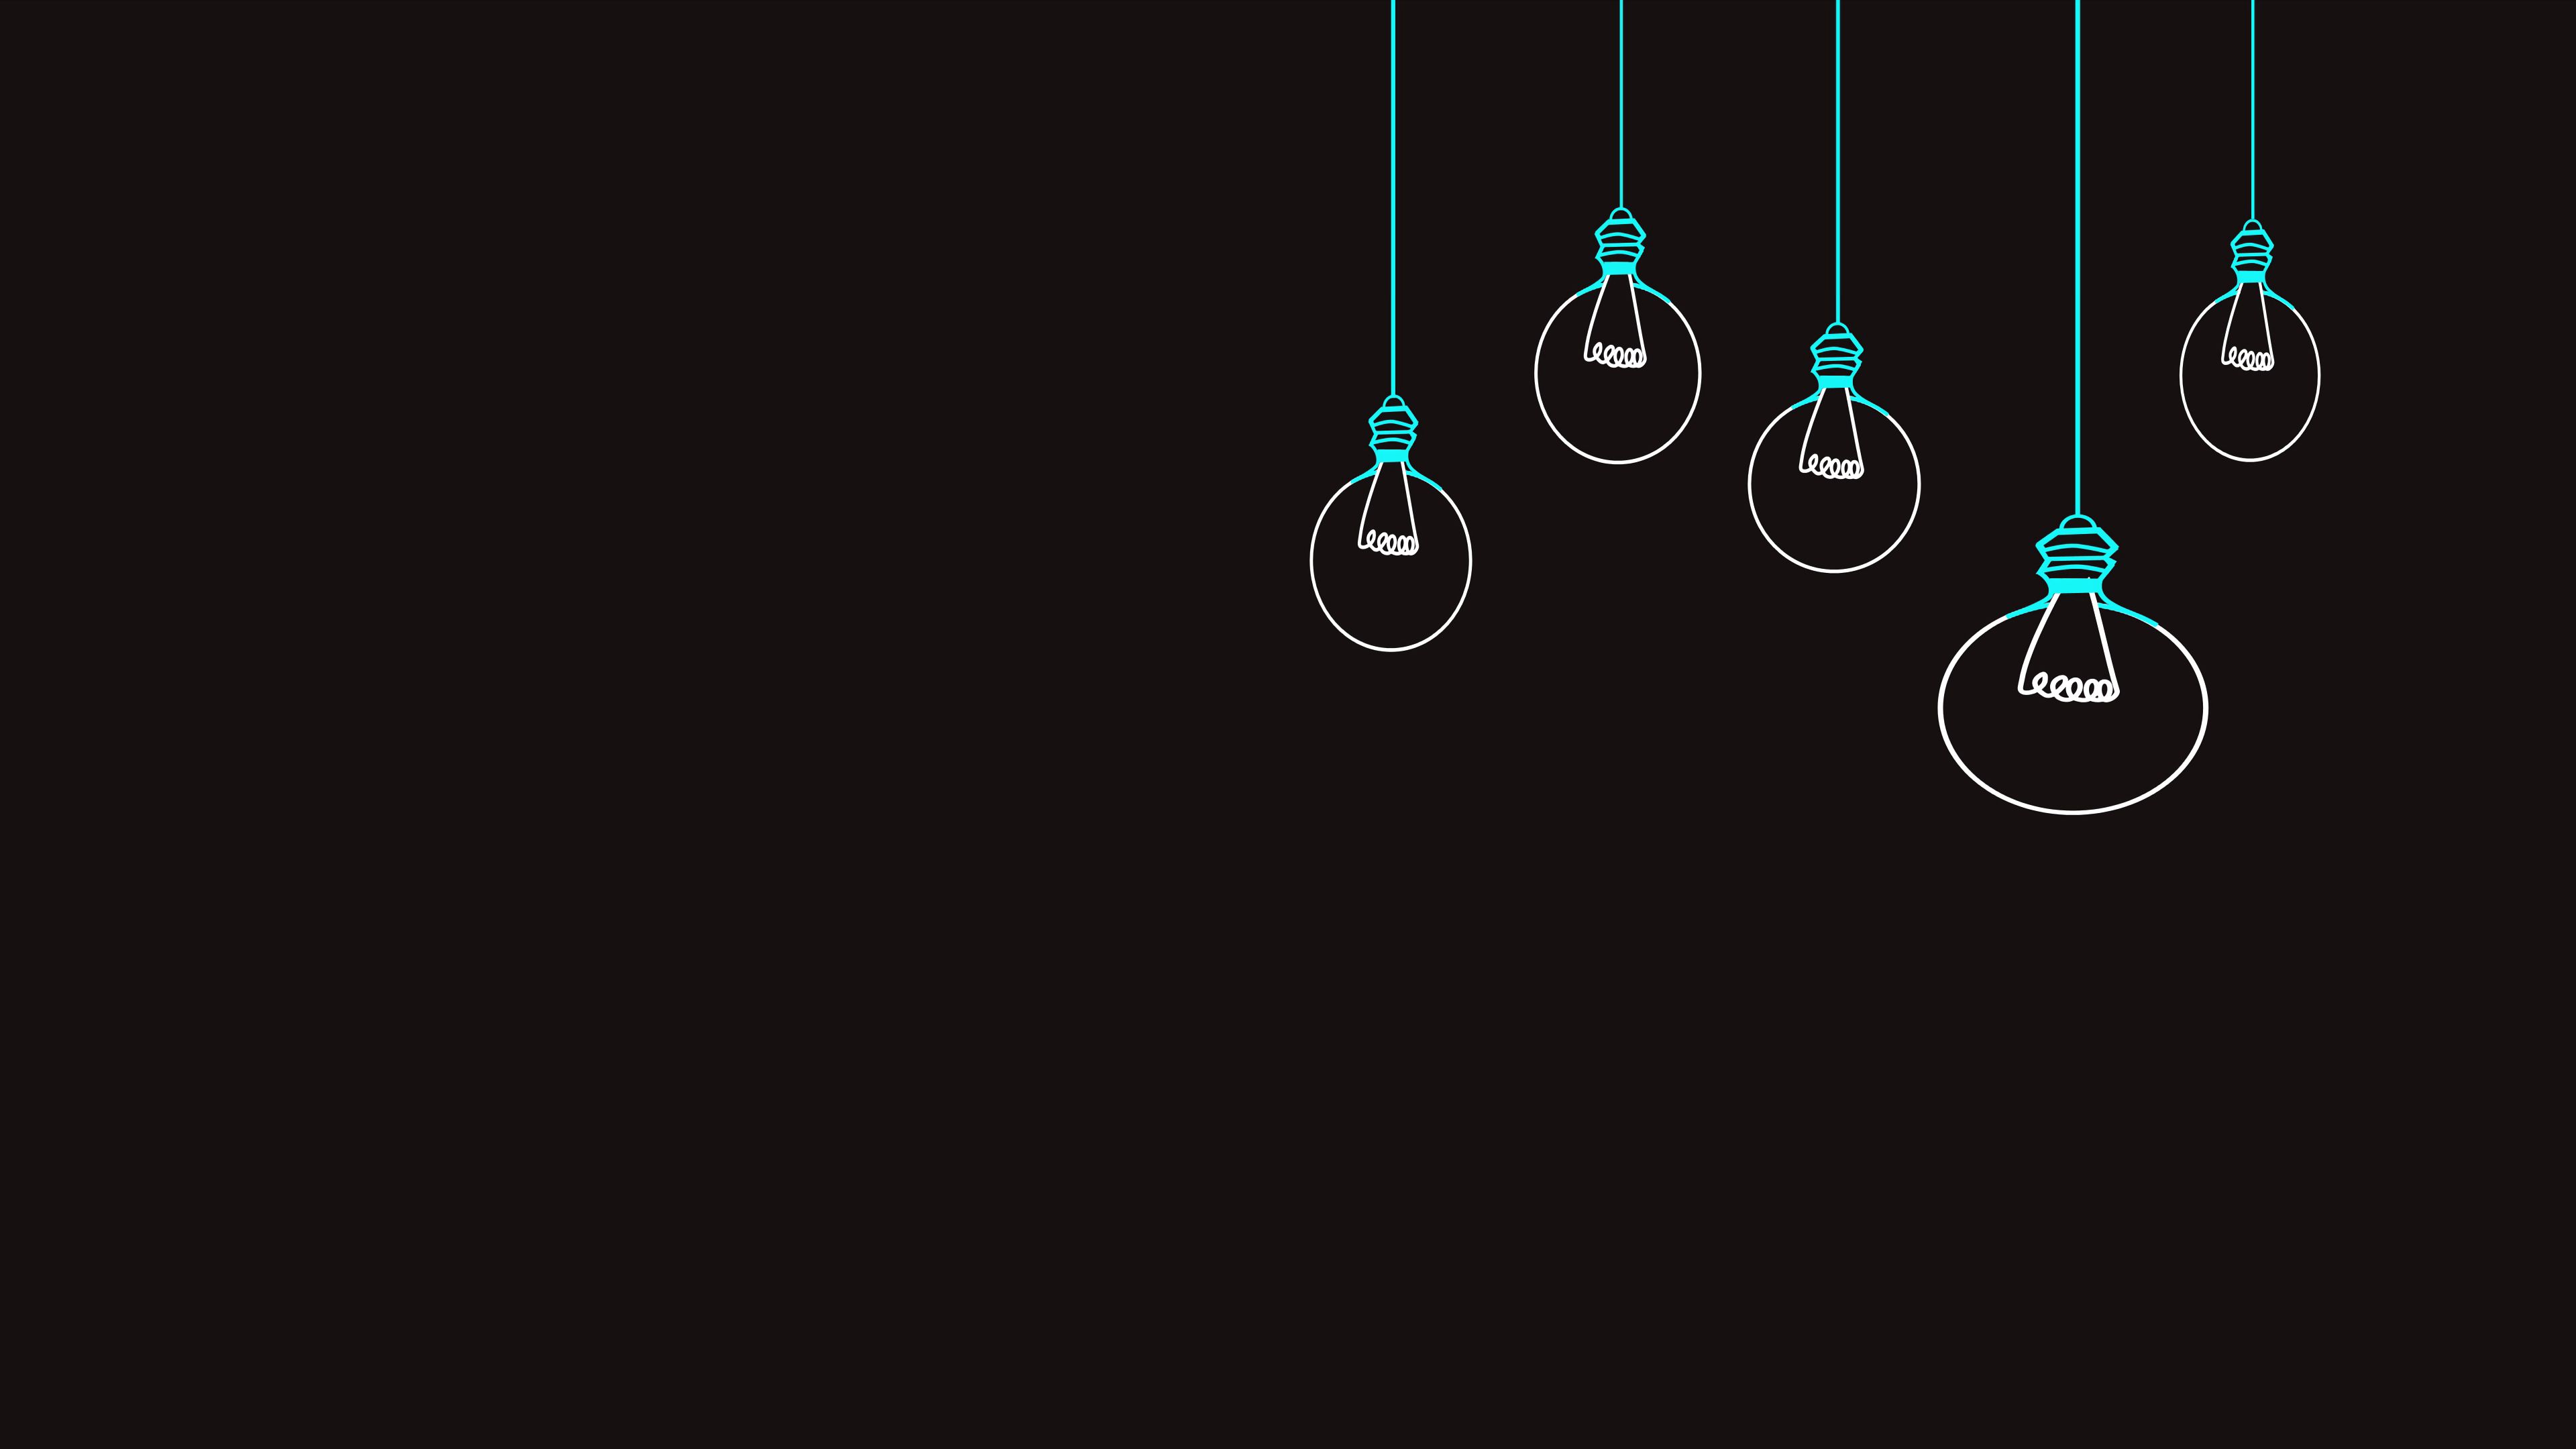 vector, black background, drawing, minimalism, picture, light bulbs wallpaper for mobile